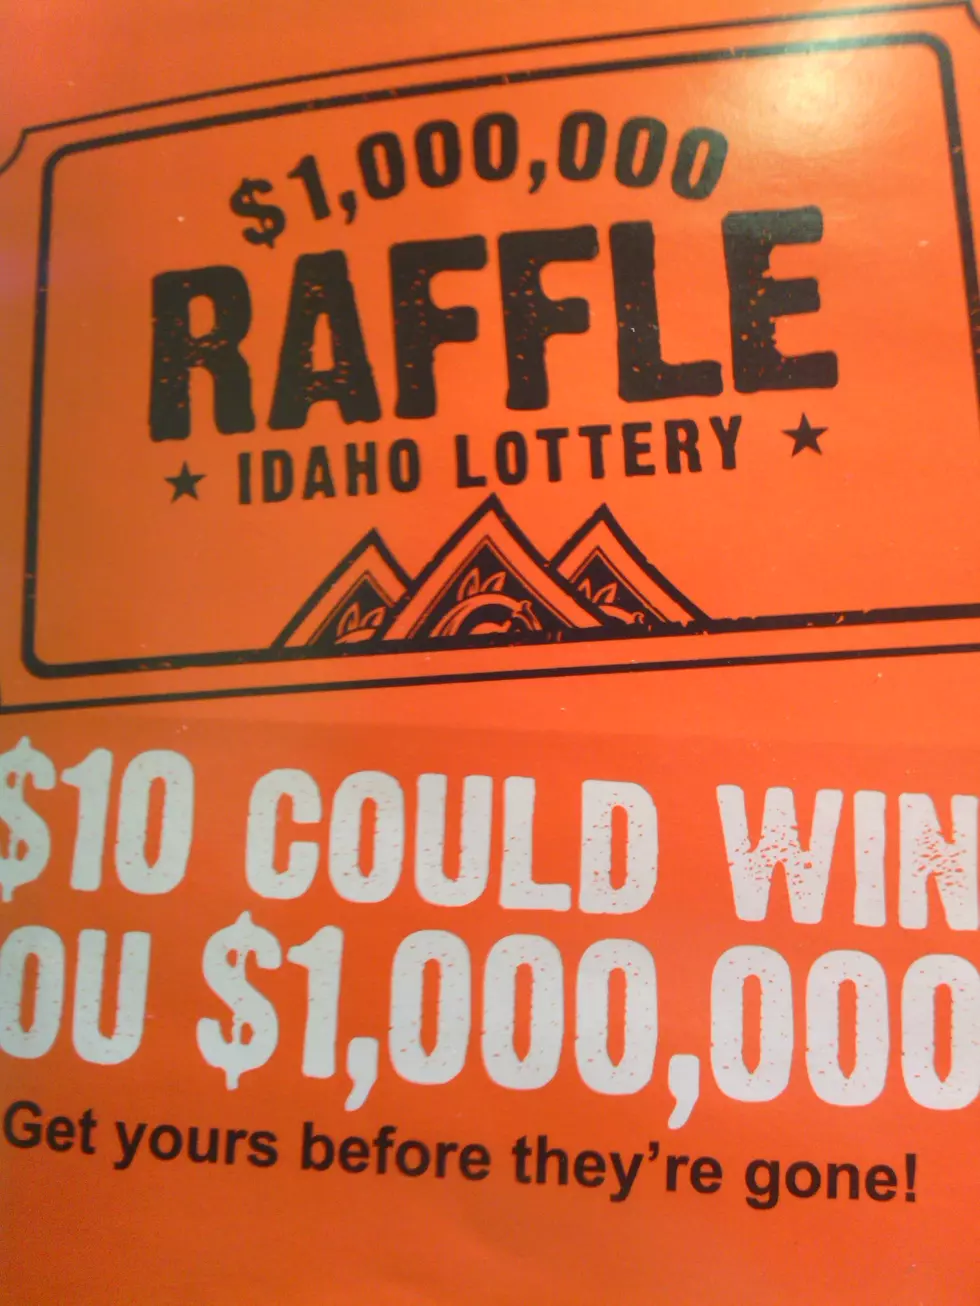 Sold Out! Idaho $1 Million Raffle Winners to be Announced Jan 4, 2023